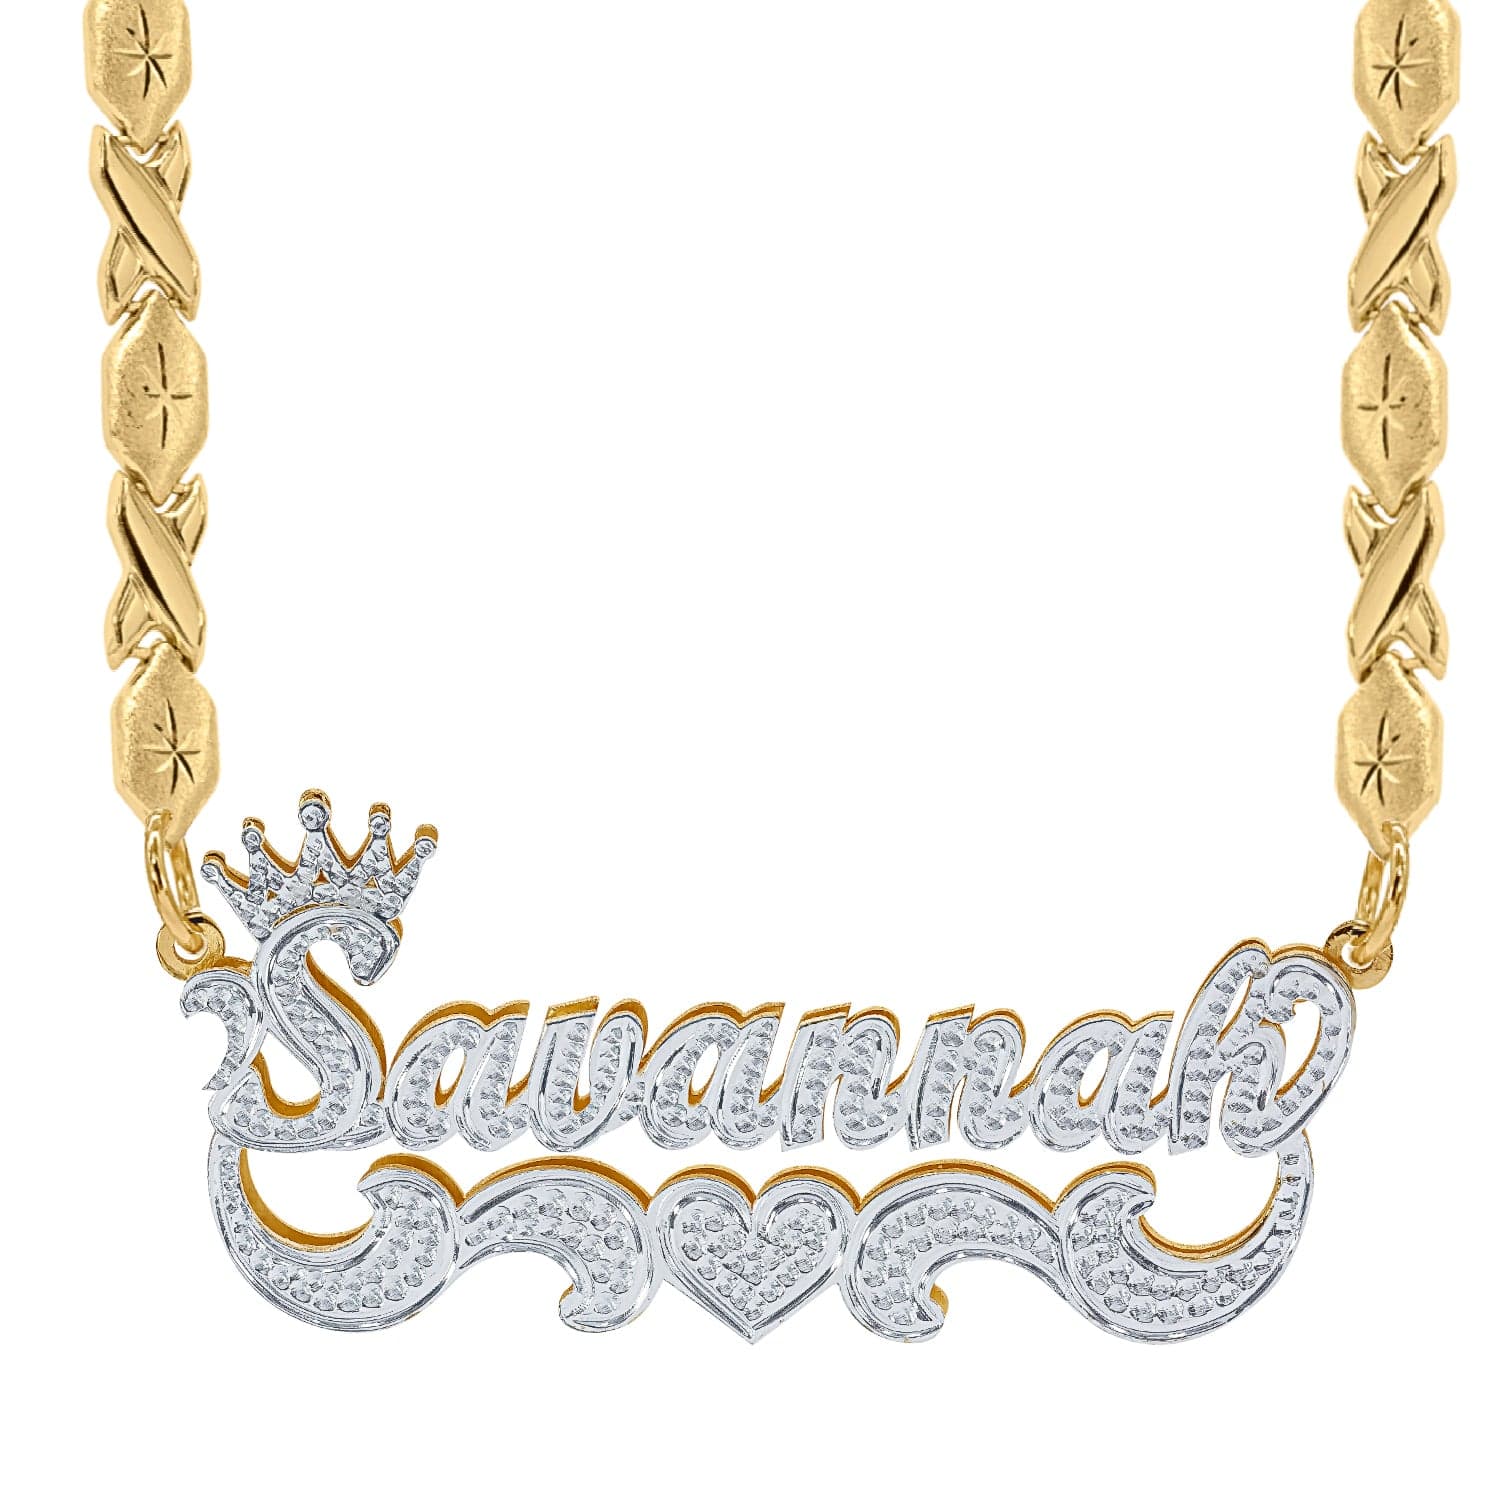 Two-Tone. Sterling Silver / Xoxo Chain Crown Double Plated Name Necklace "Savannah" with Xoxo chain